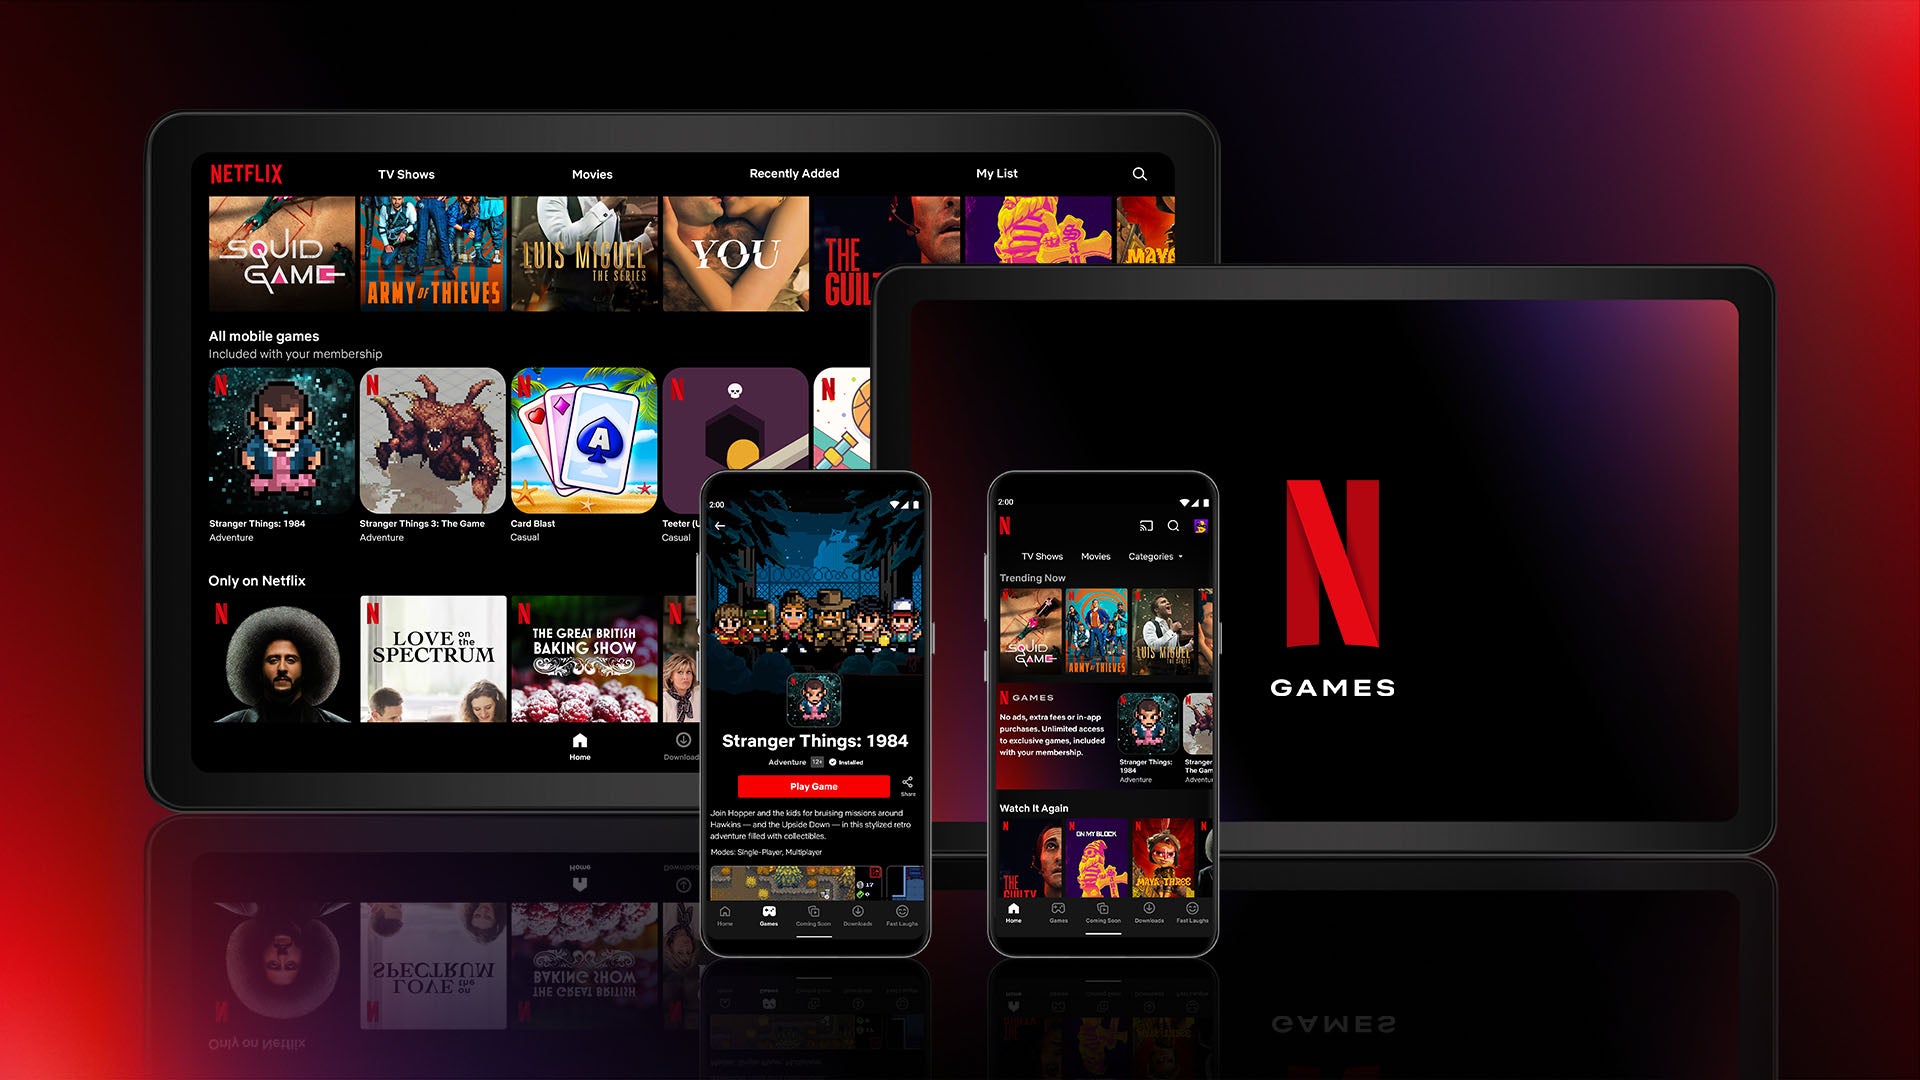 HeyWhatsNew: Let the games begin! Netflix to rollout cutting edge controller app